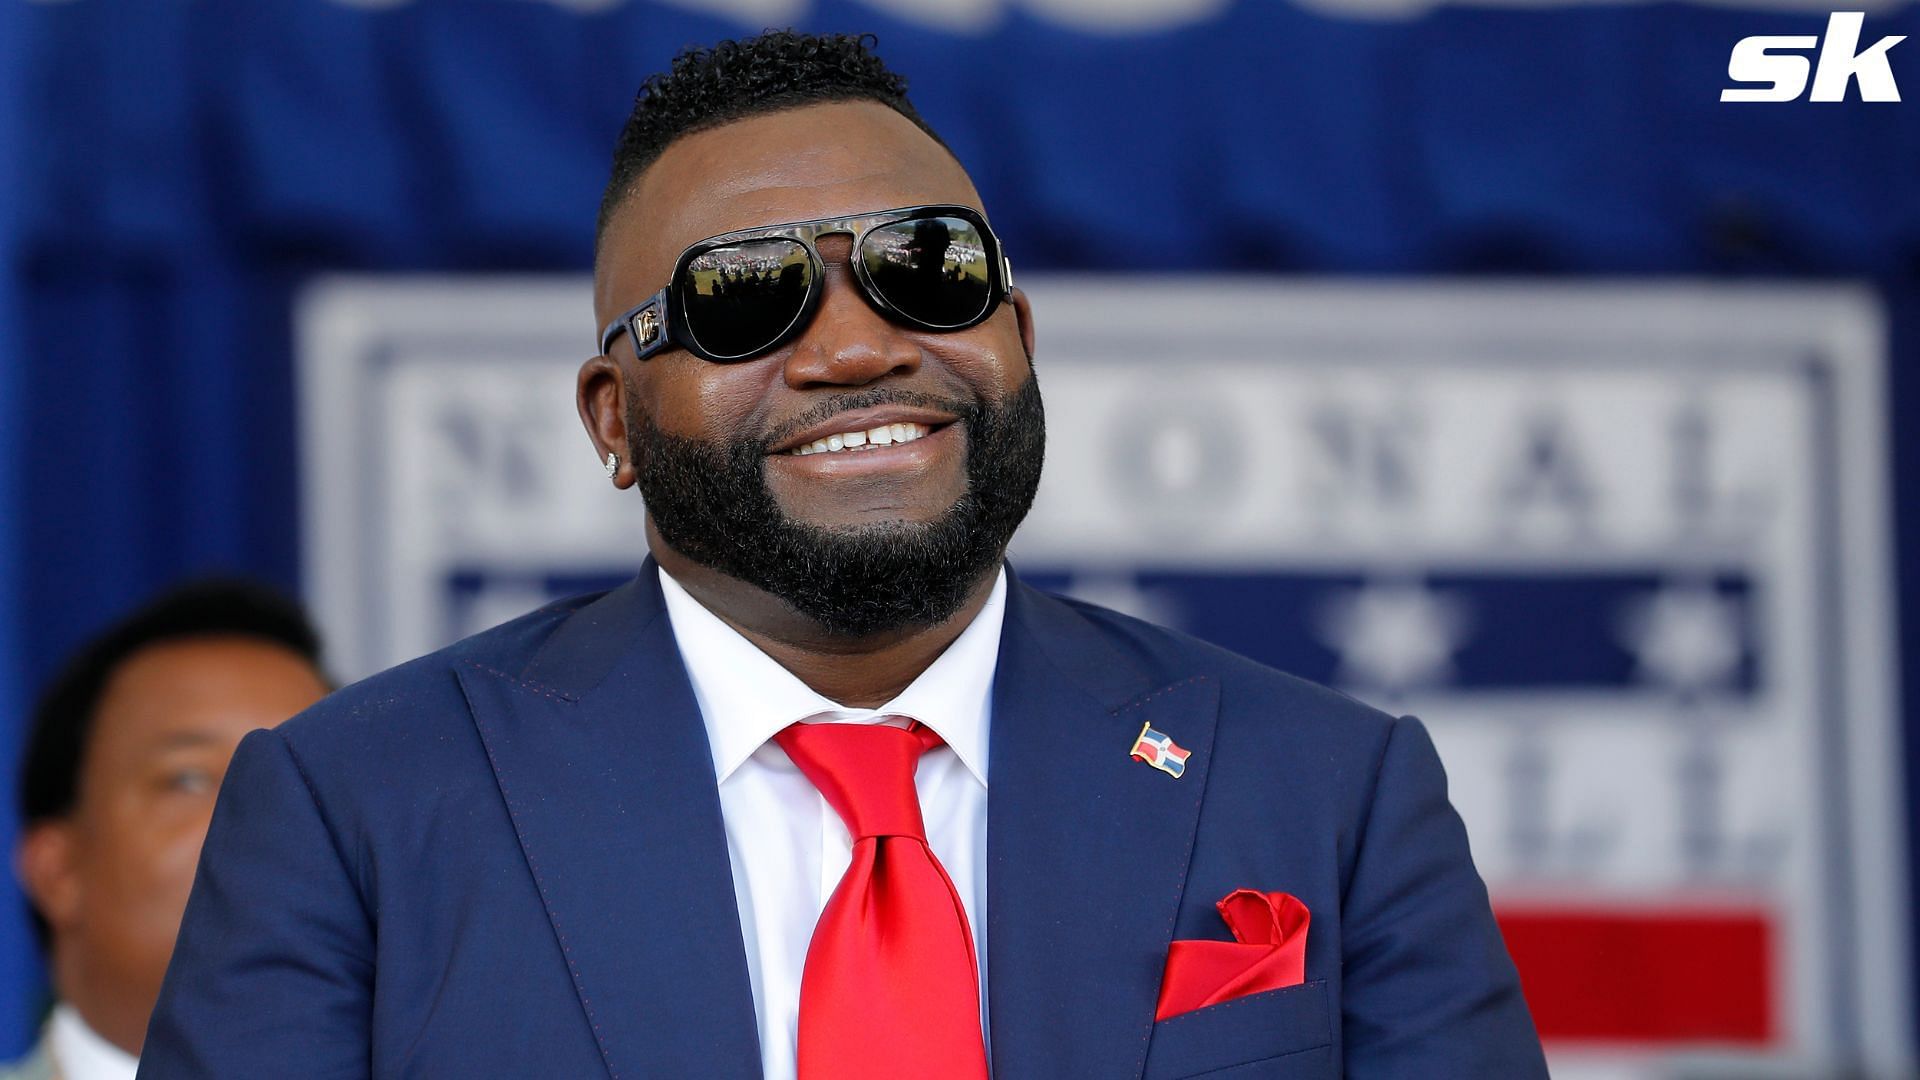 David Ortiz heads to Hall of Fame as Latino legacy continues to